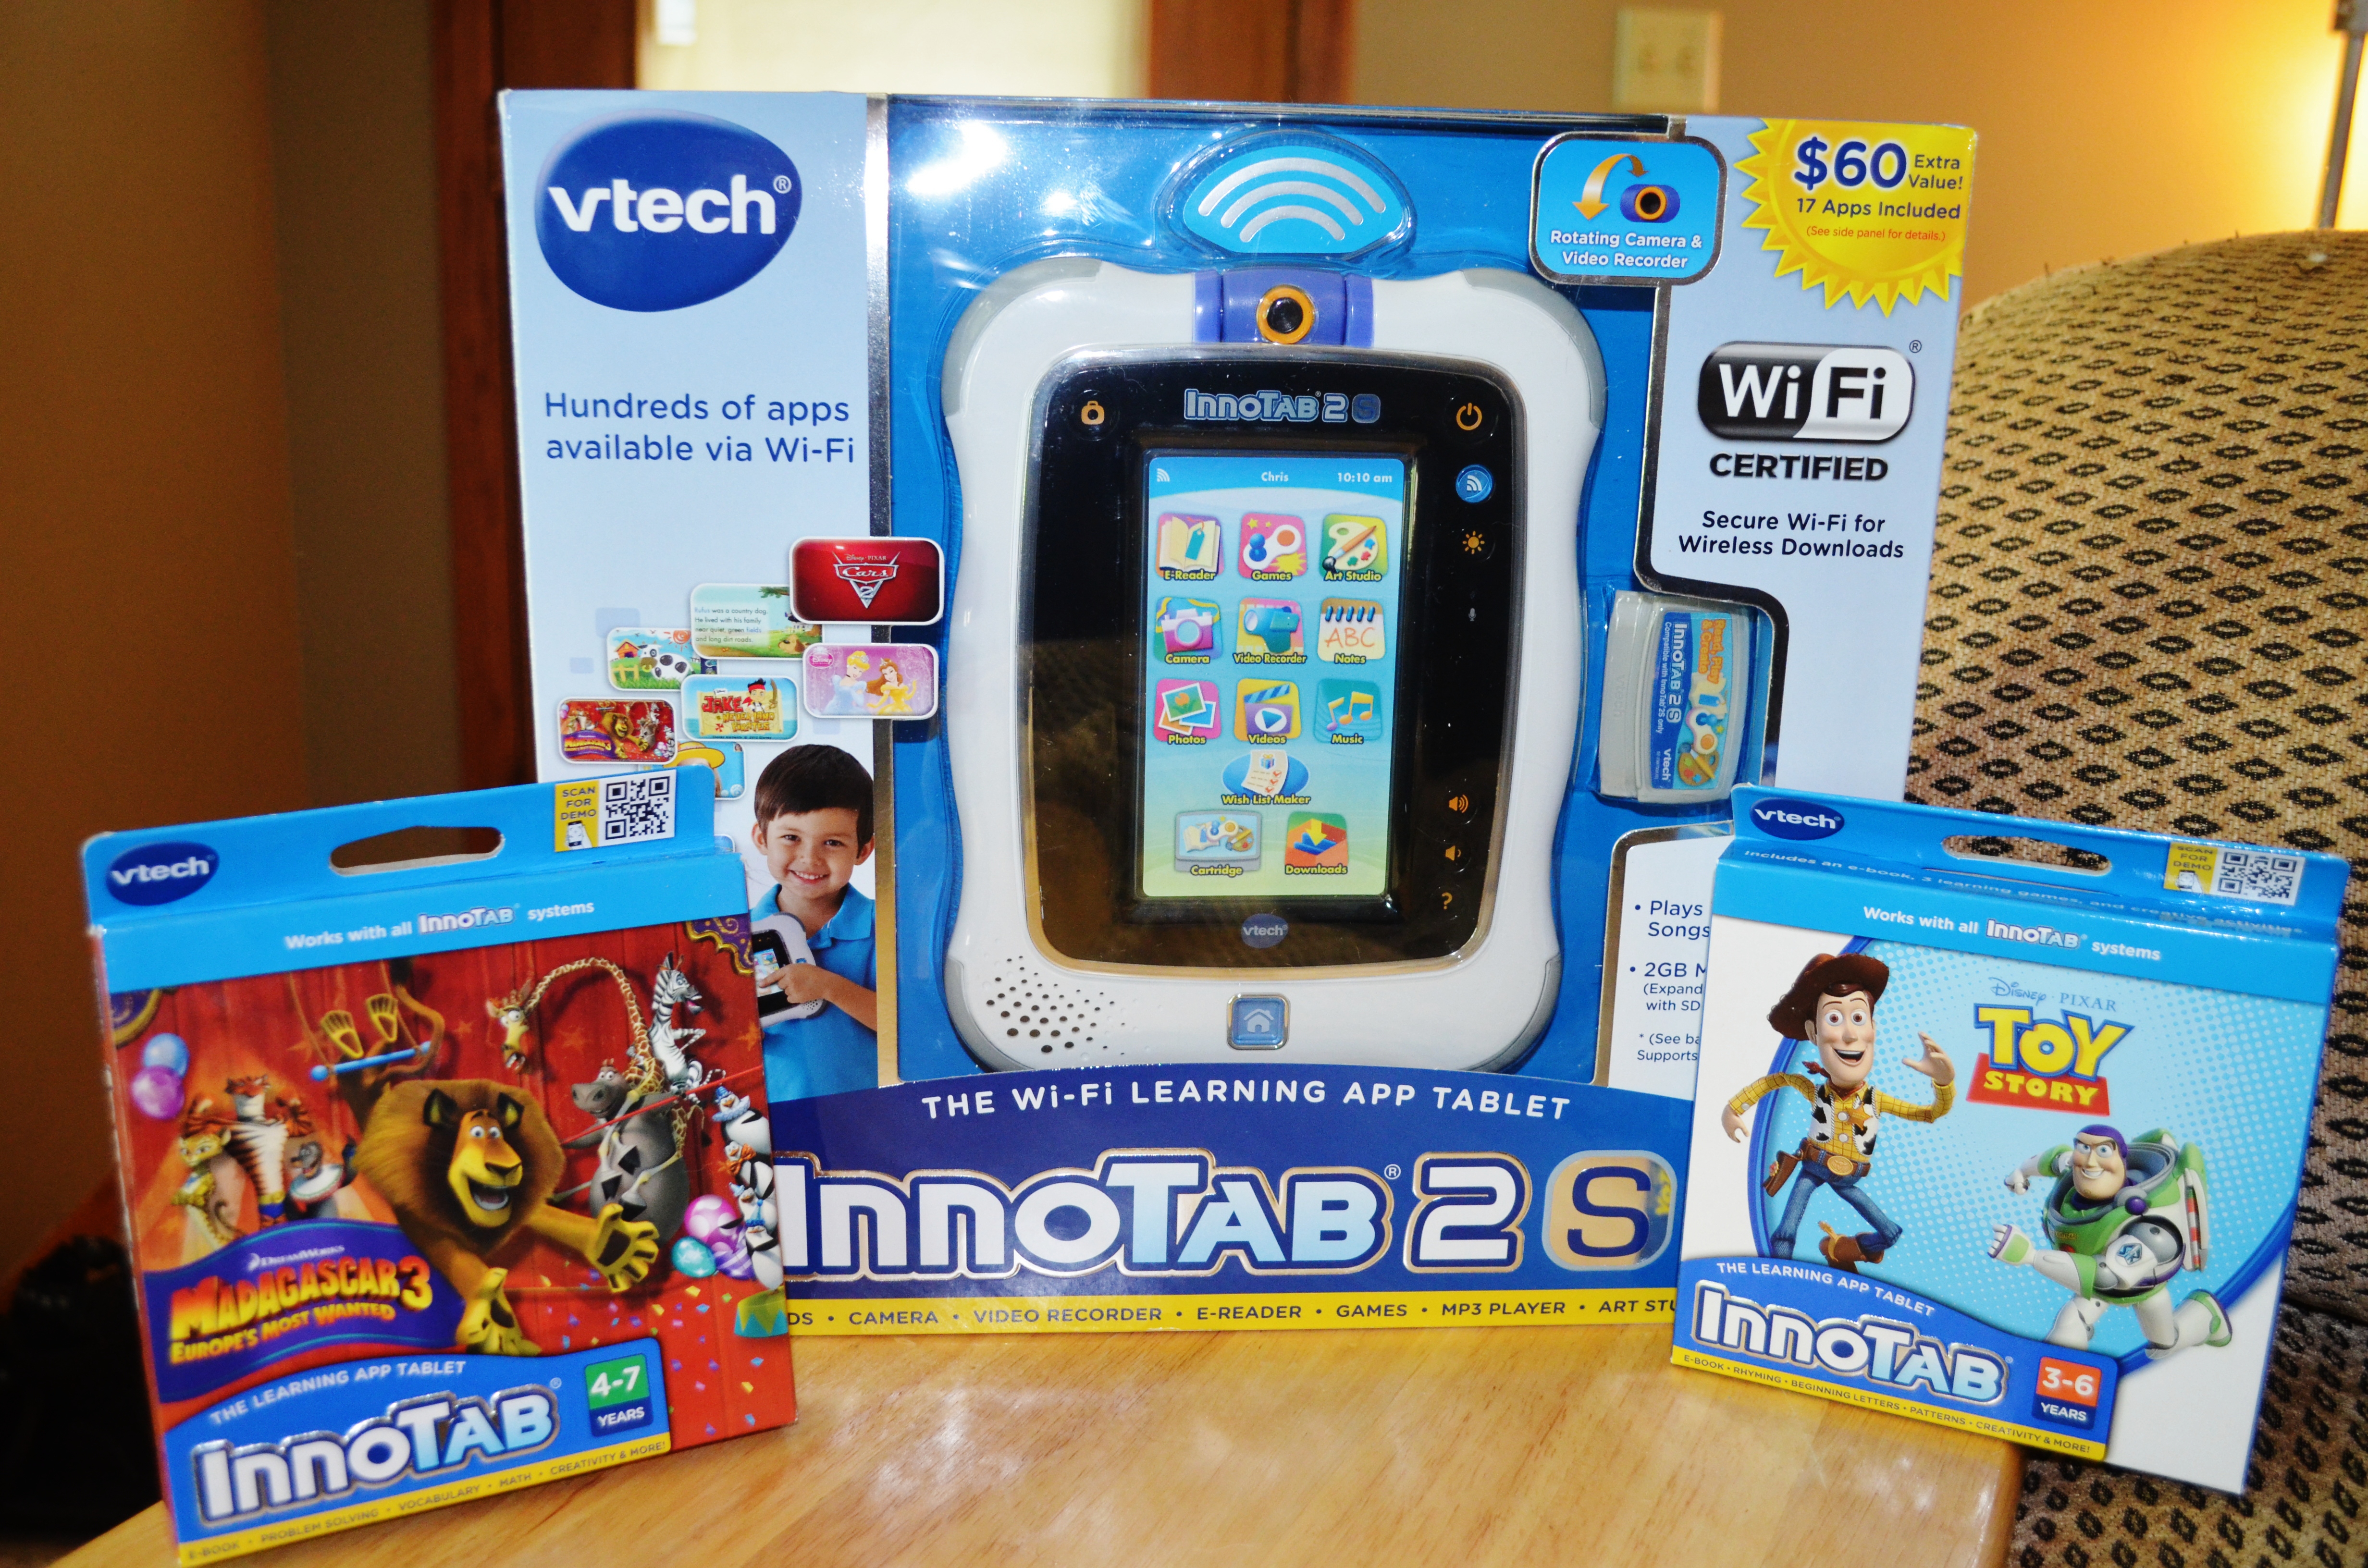 VTech InnoTab 2S Wi-Fi Learning App Tablet Review